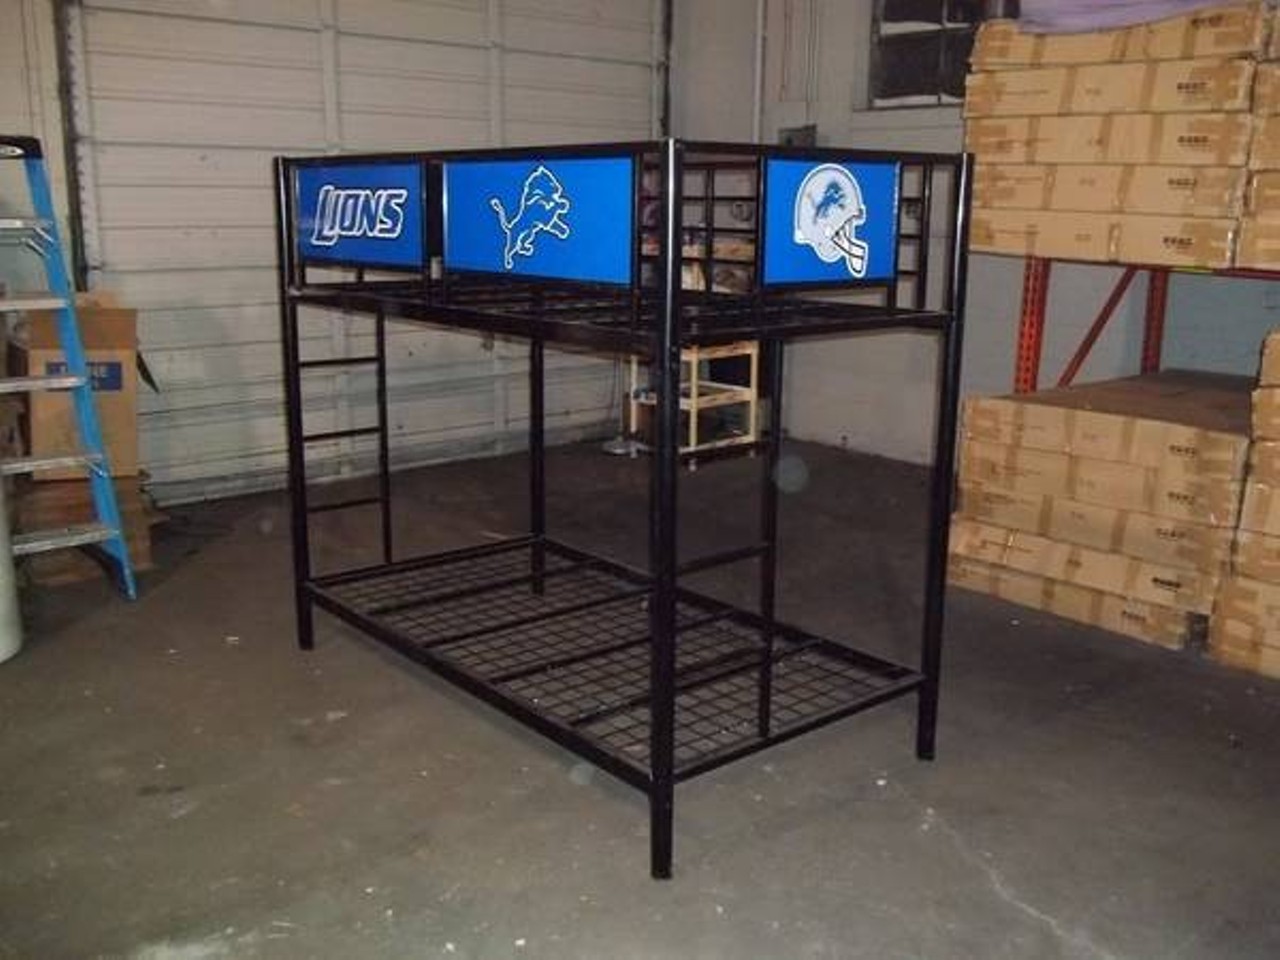 Detroit Lions Twin Bunk Bed ($300)
You gotta teach &#145;em when they&#146;re young: when you live in the D you&#146;re a diehard Lions fan, no matter what.
Photo via  Frank / Craigslist